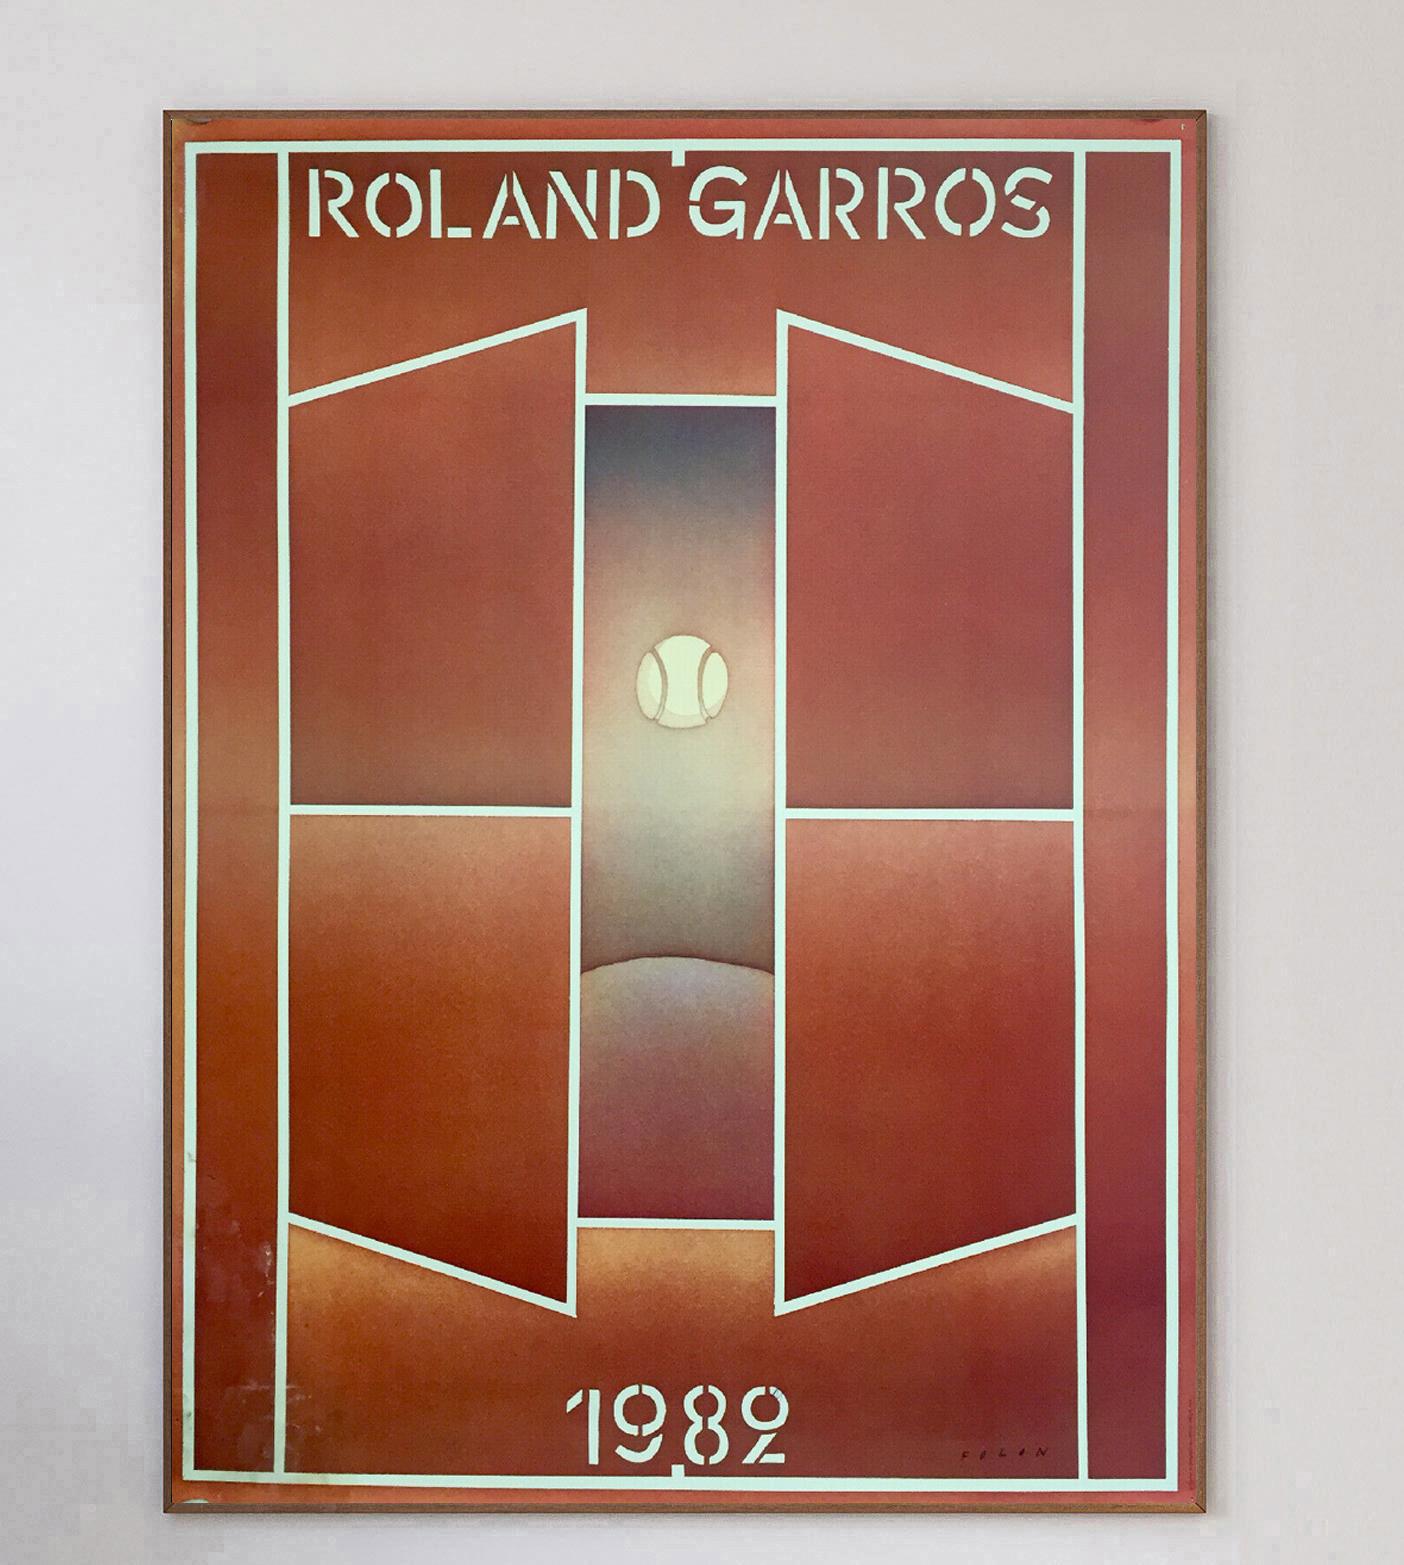 The 1982 French Open was a tennis tournament that took place on the outdoor clay courts at the Stade Roland Garros in Paris, France. The tournament was held from late May until early June. It was the 86th staging of the French Open, and the first